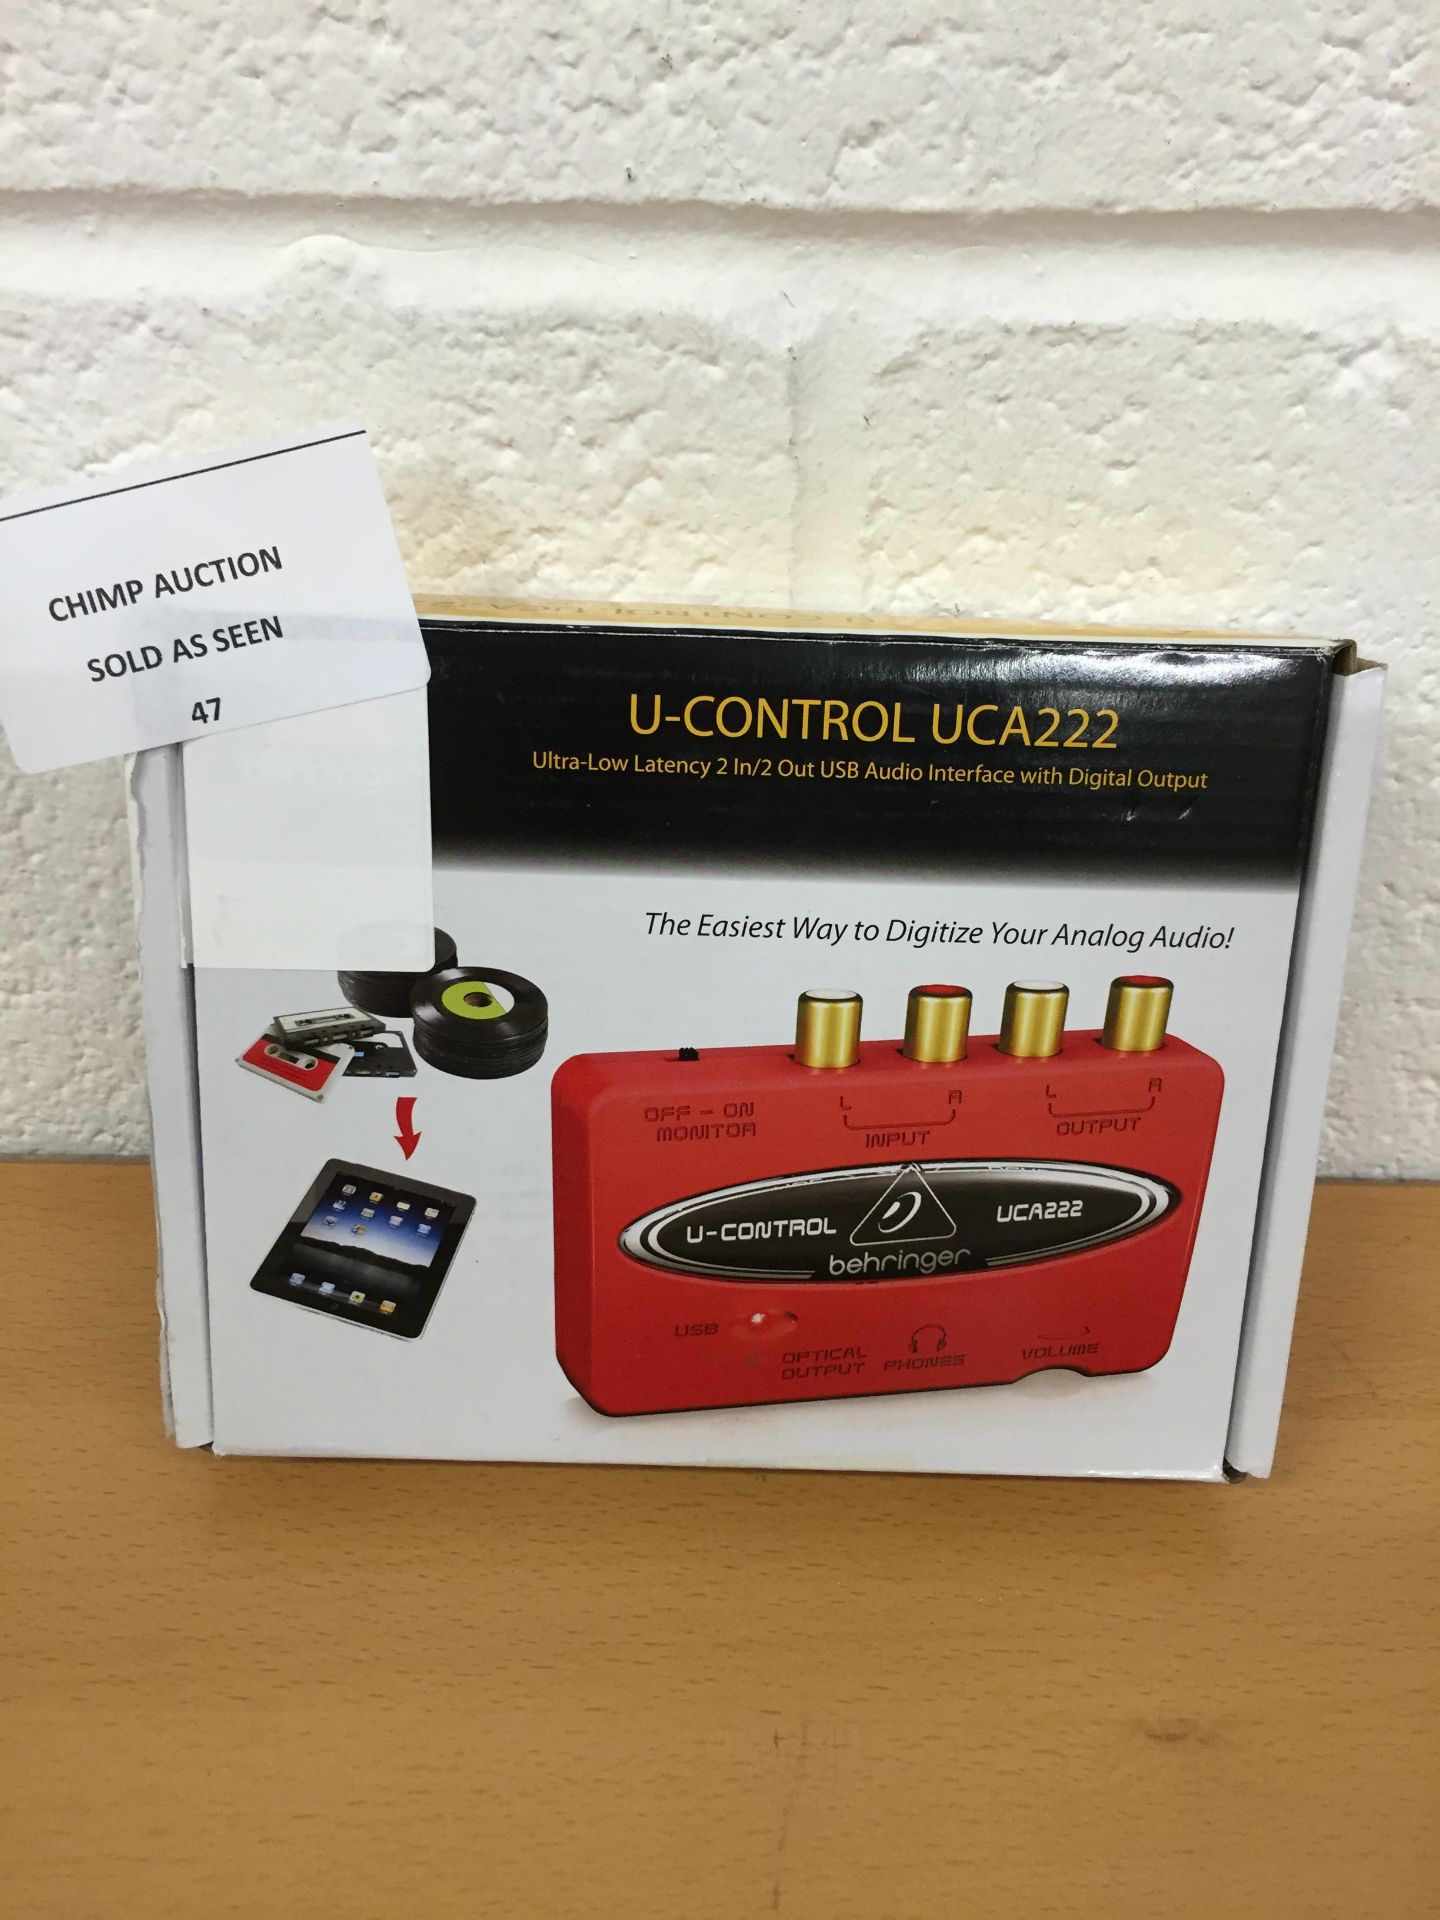 Behringer UCA222 U-Control Ultra-Low Latency 2 In/2 Out USB Audio Interface